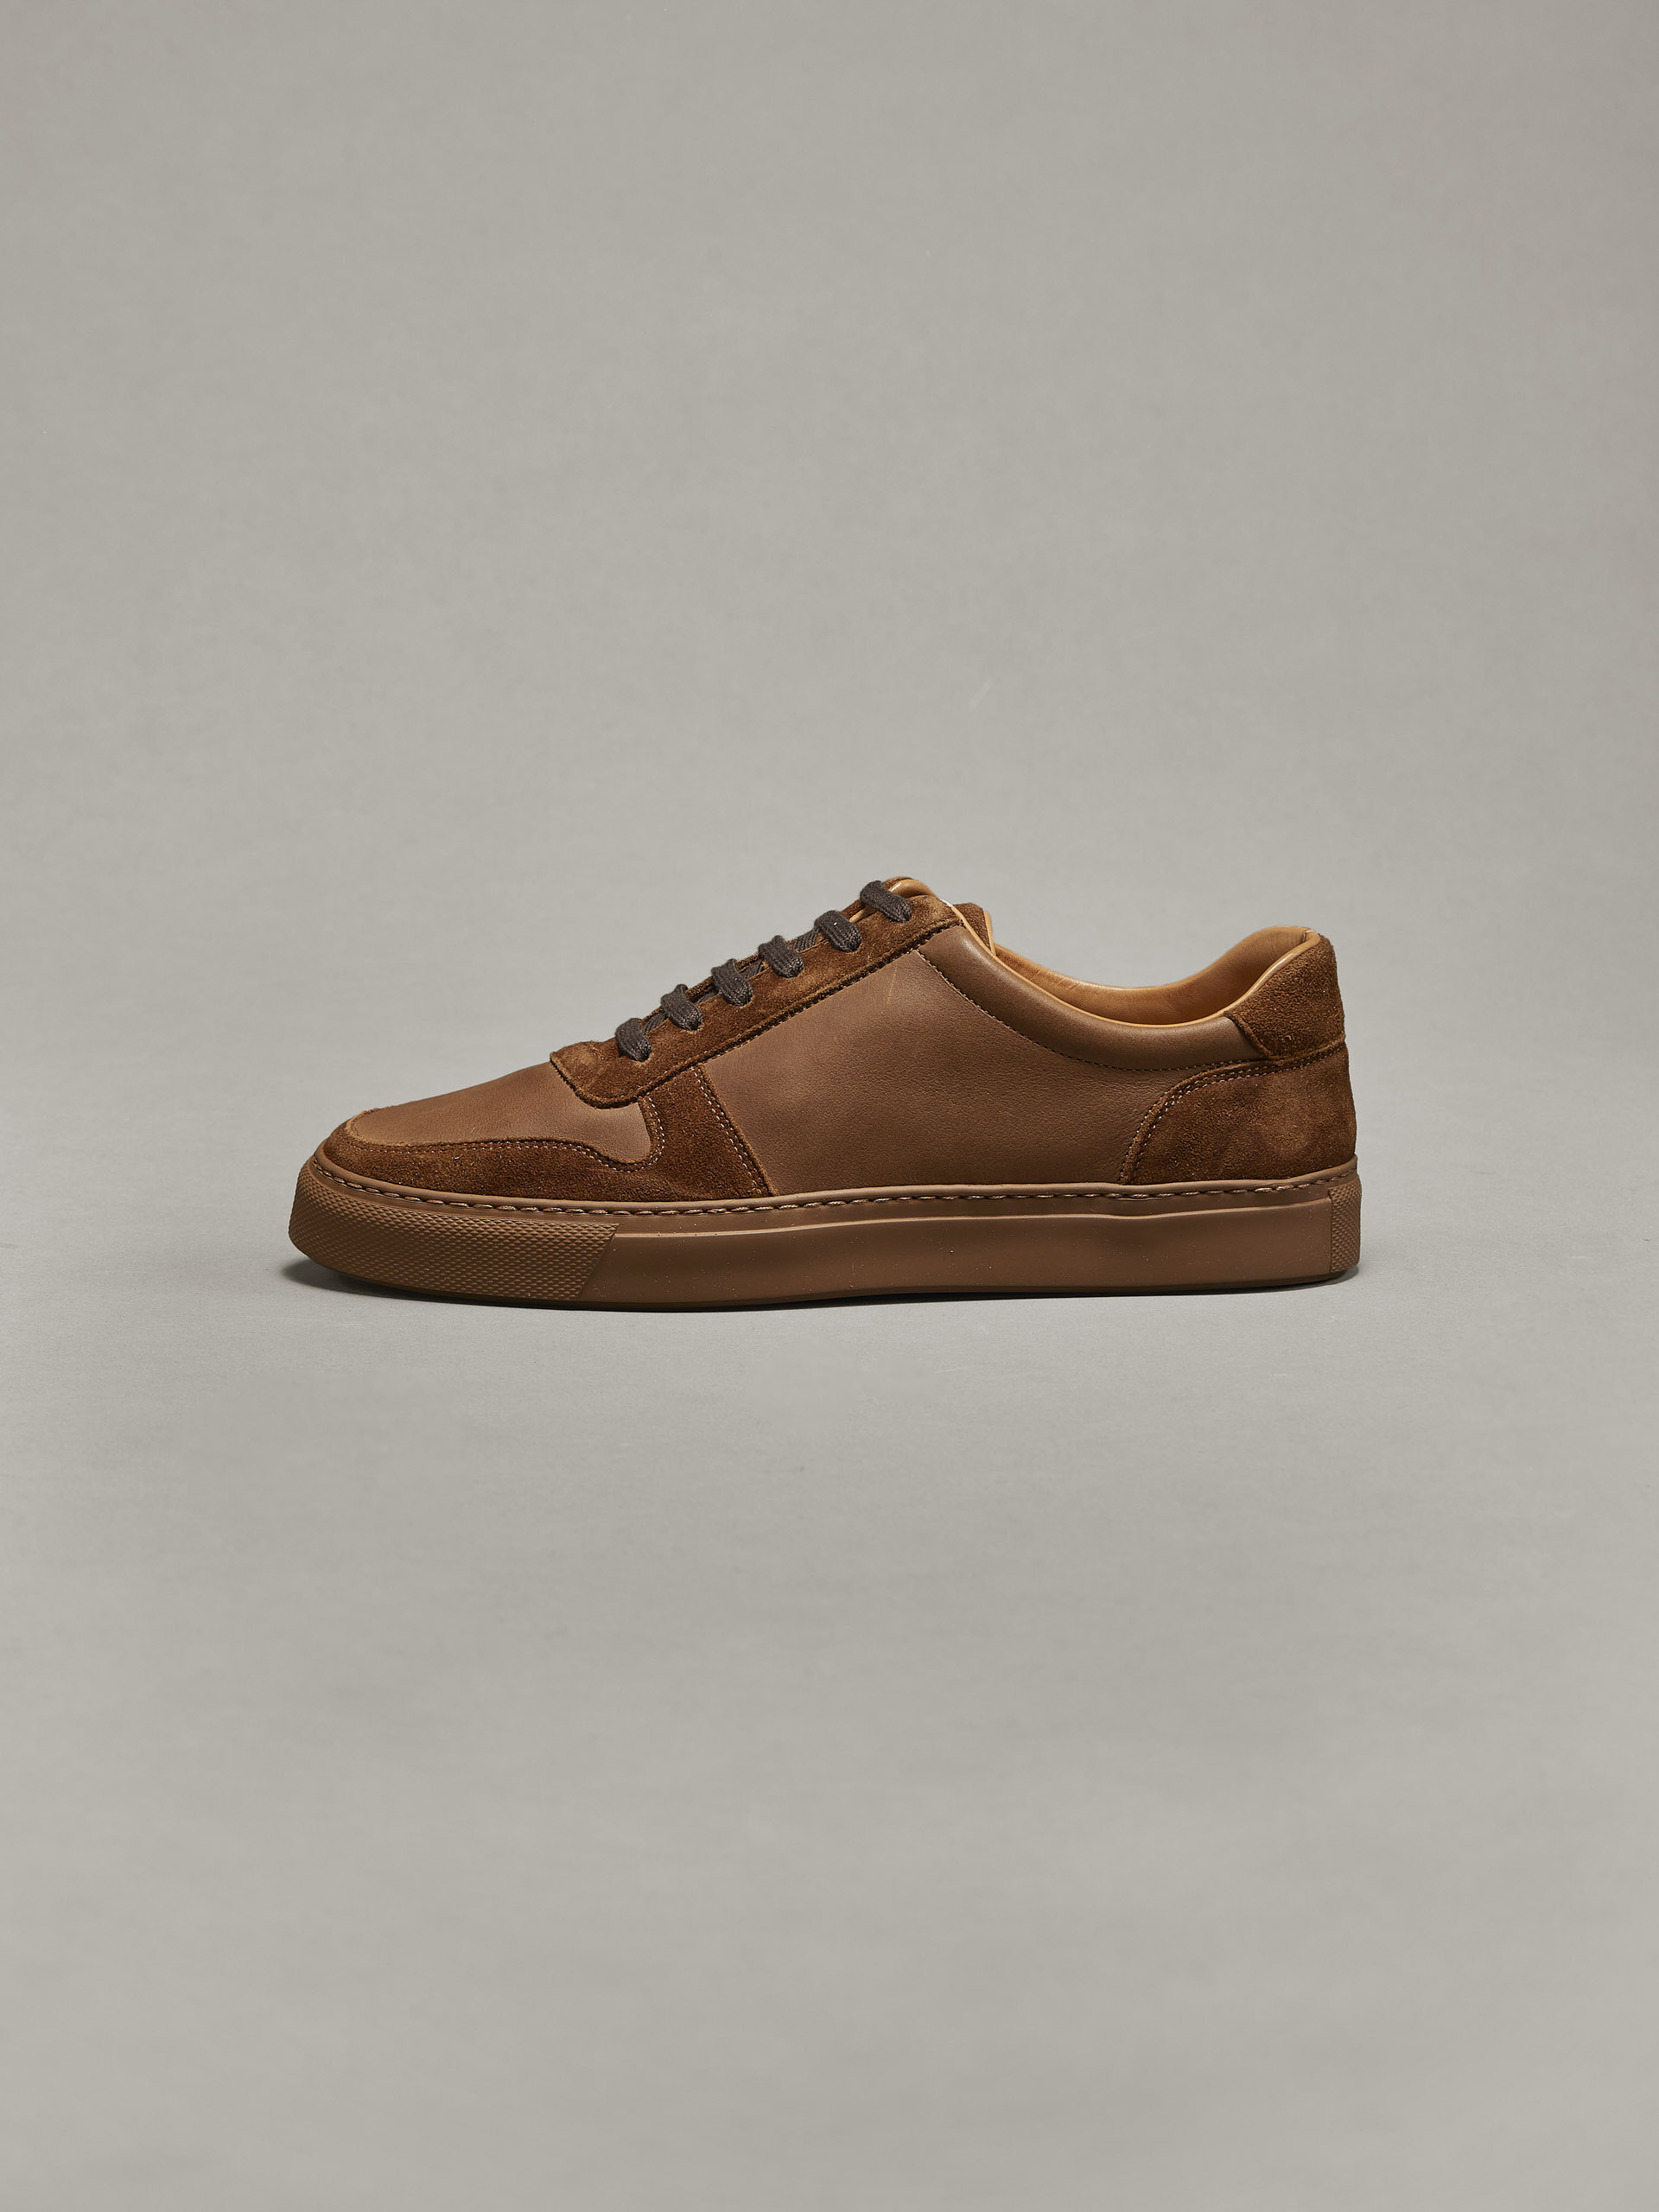 The Court Classic Sneakers in Kudu Leather